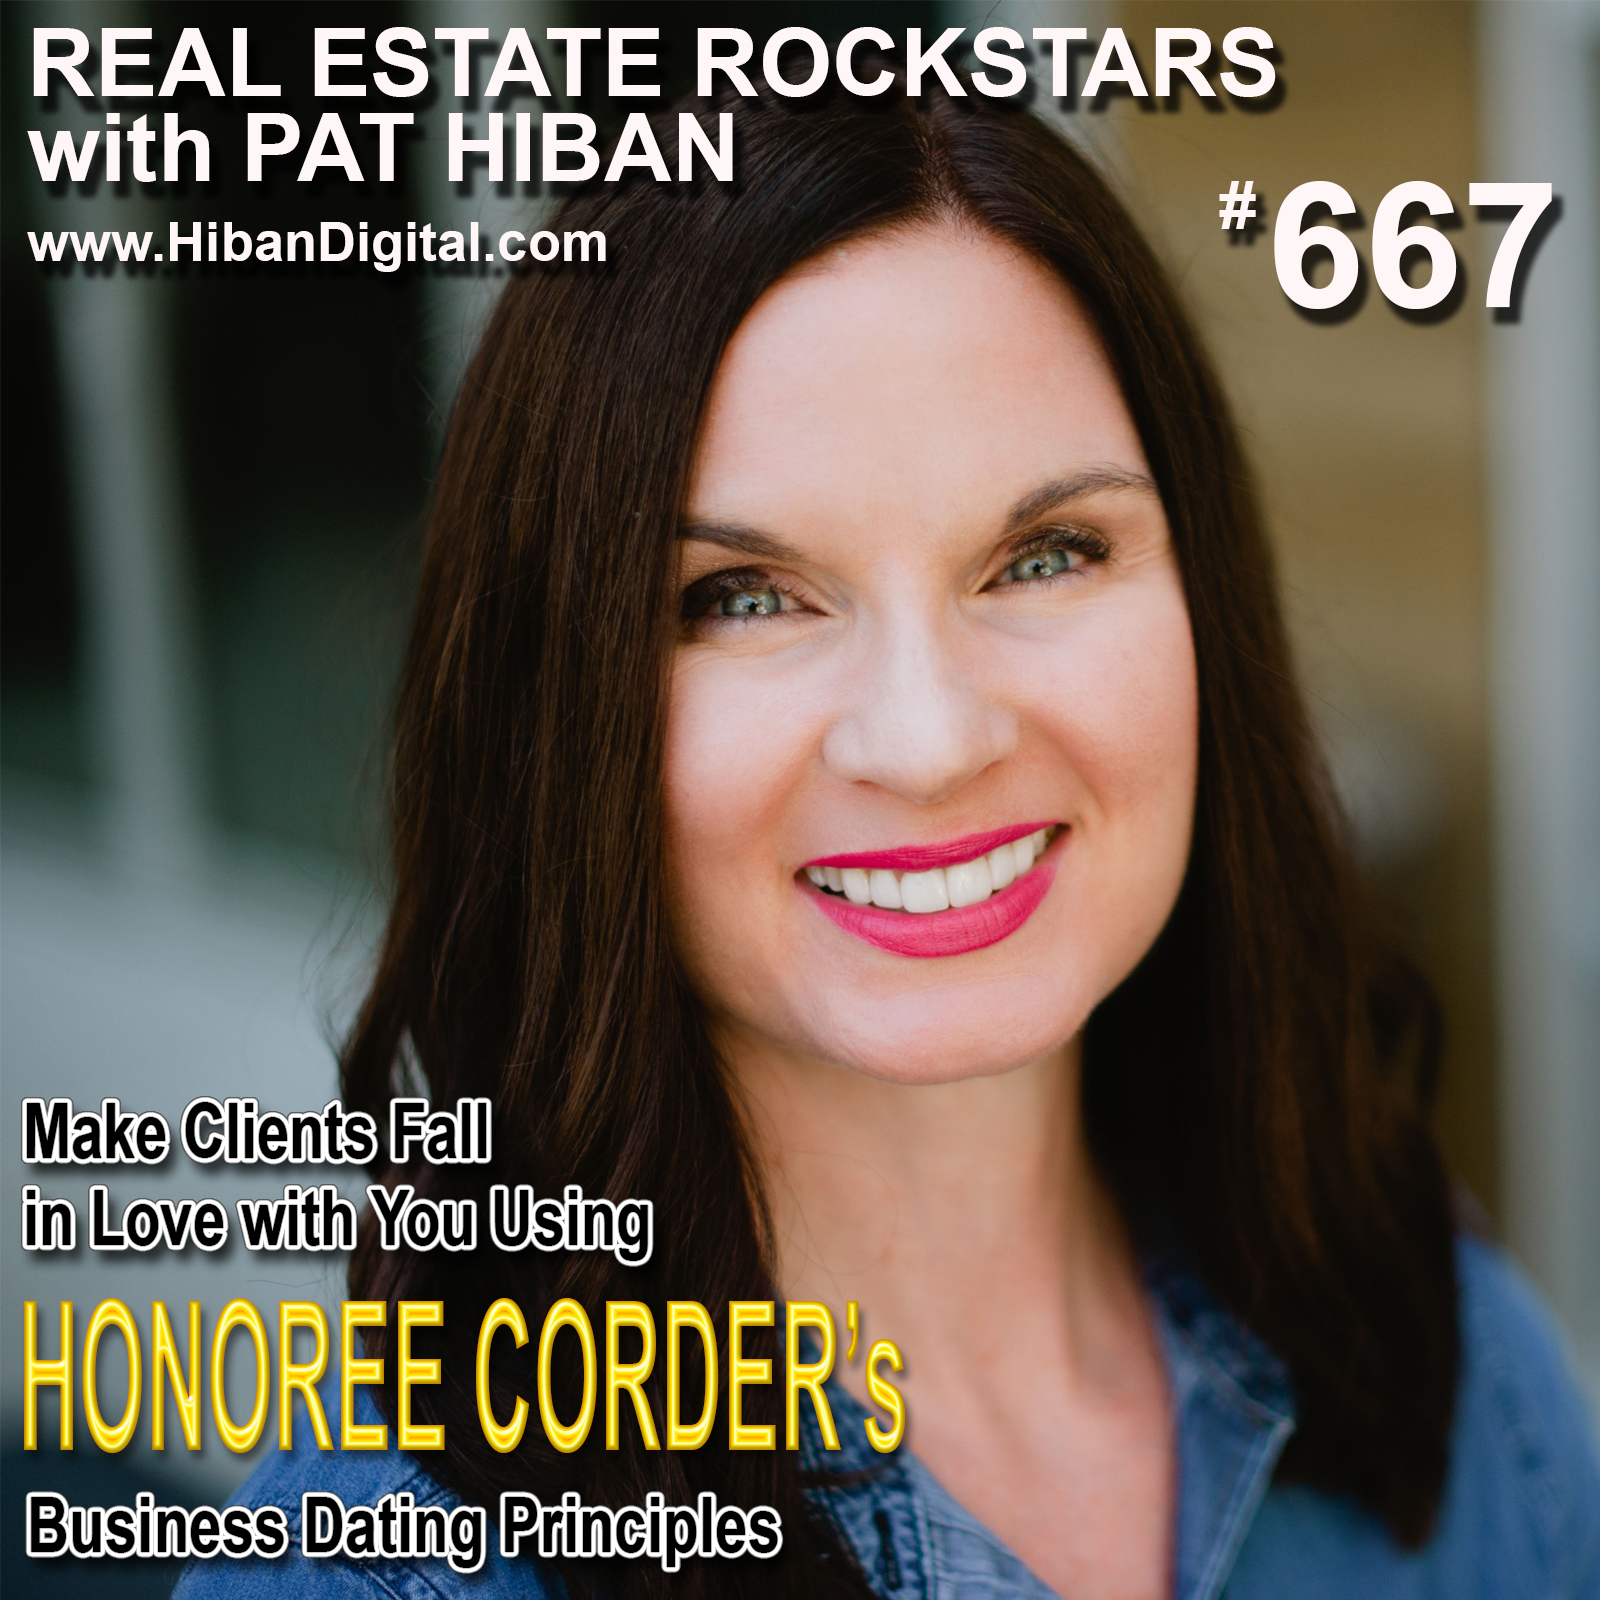 Business dating Honoree Corder